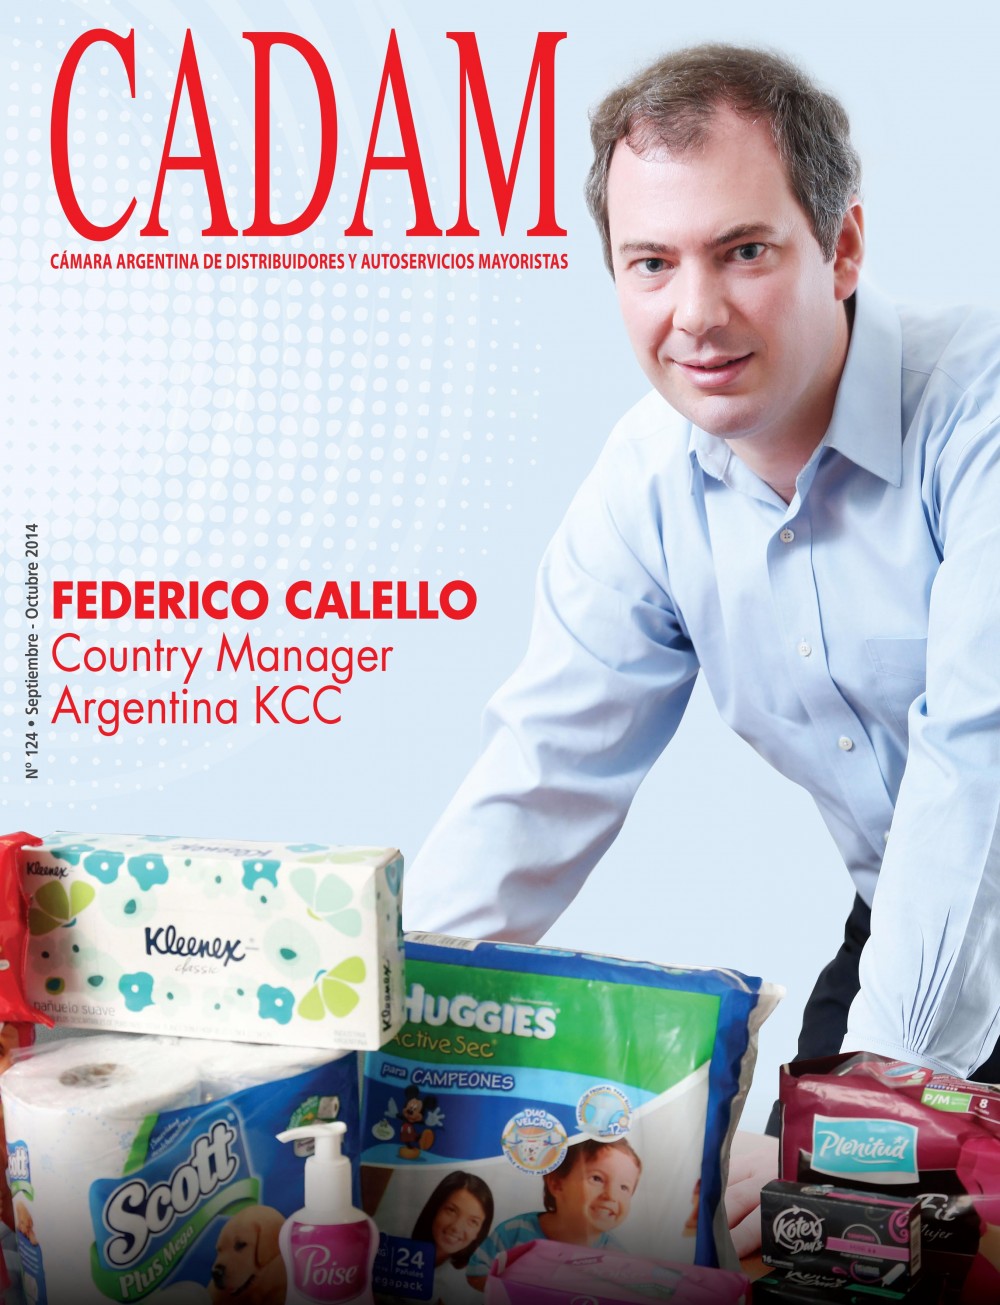 Federico Calello: Country Manager Argentina KCC